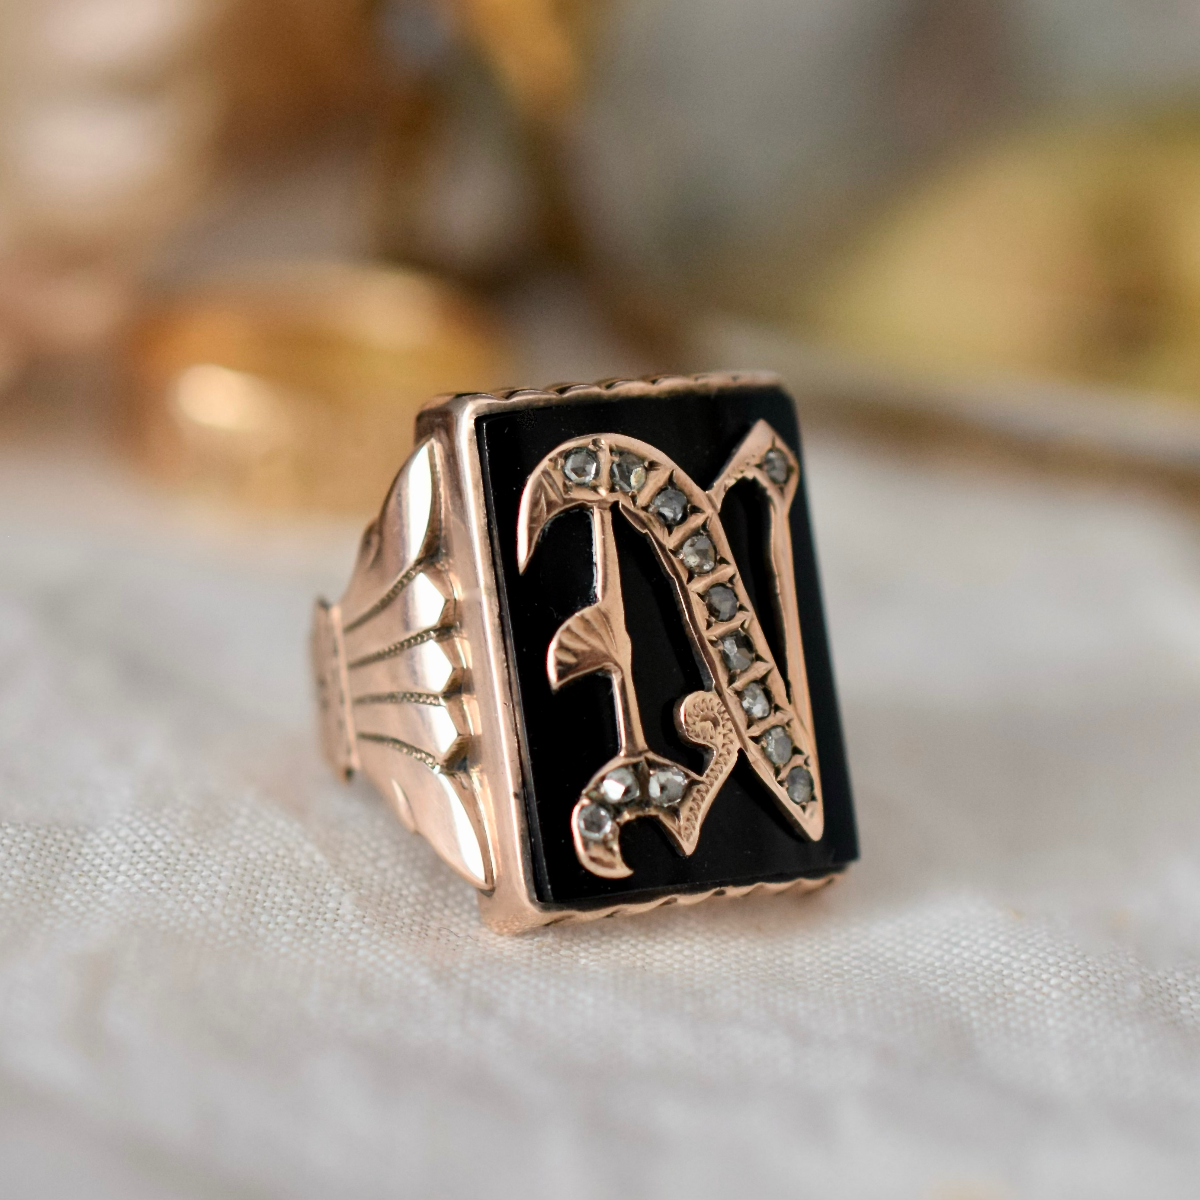 Antique Art Deco 9ct Rose Gold, Onyx And Diamond ’N’ Initial Ring Circa 1930